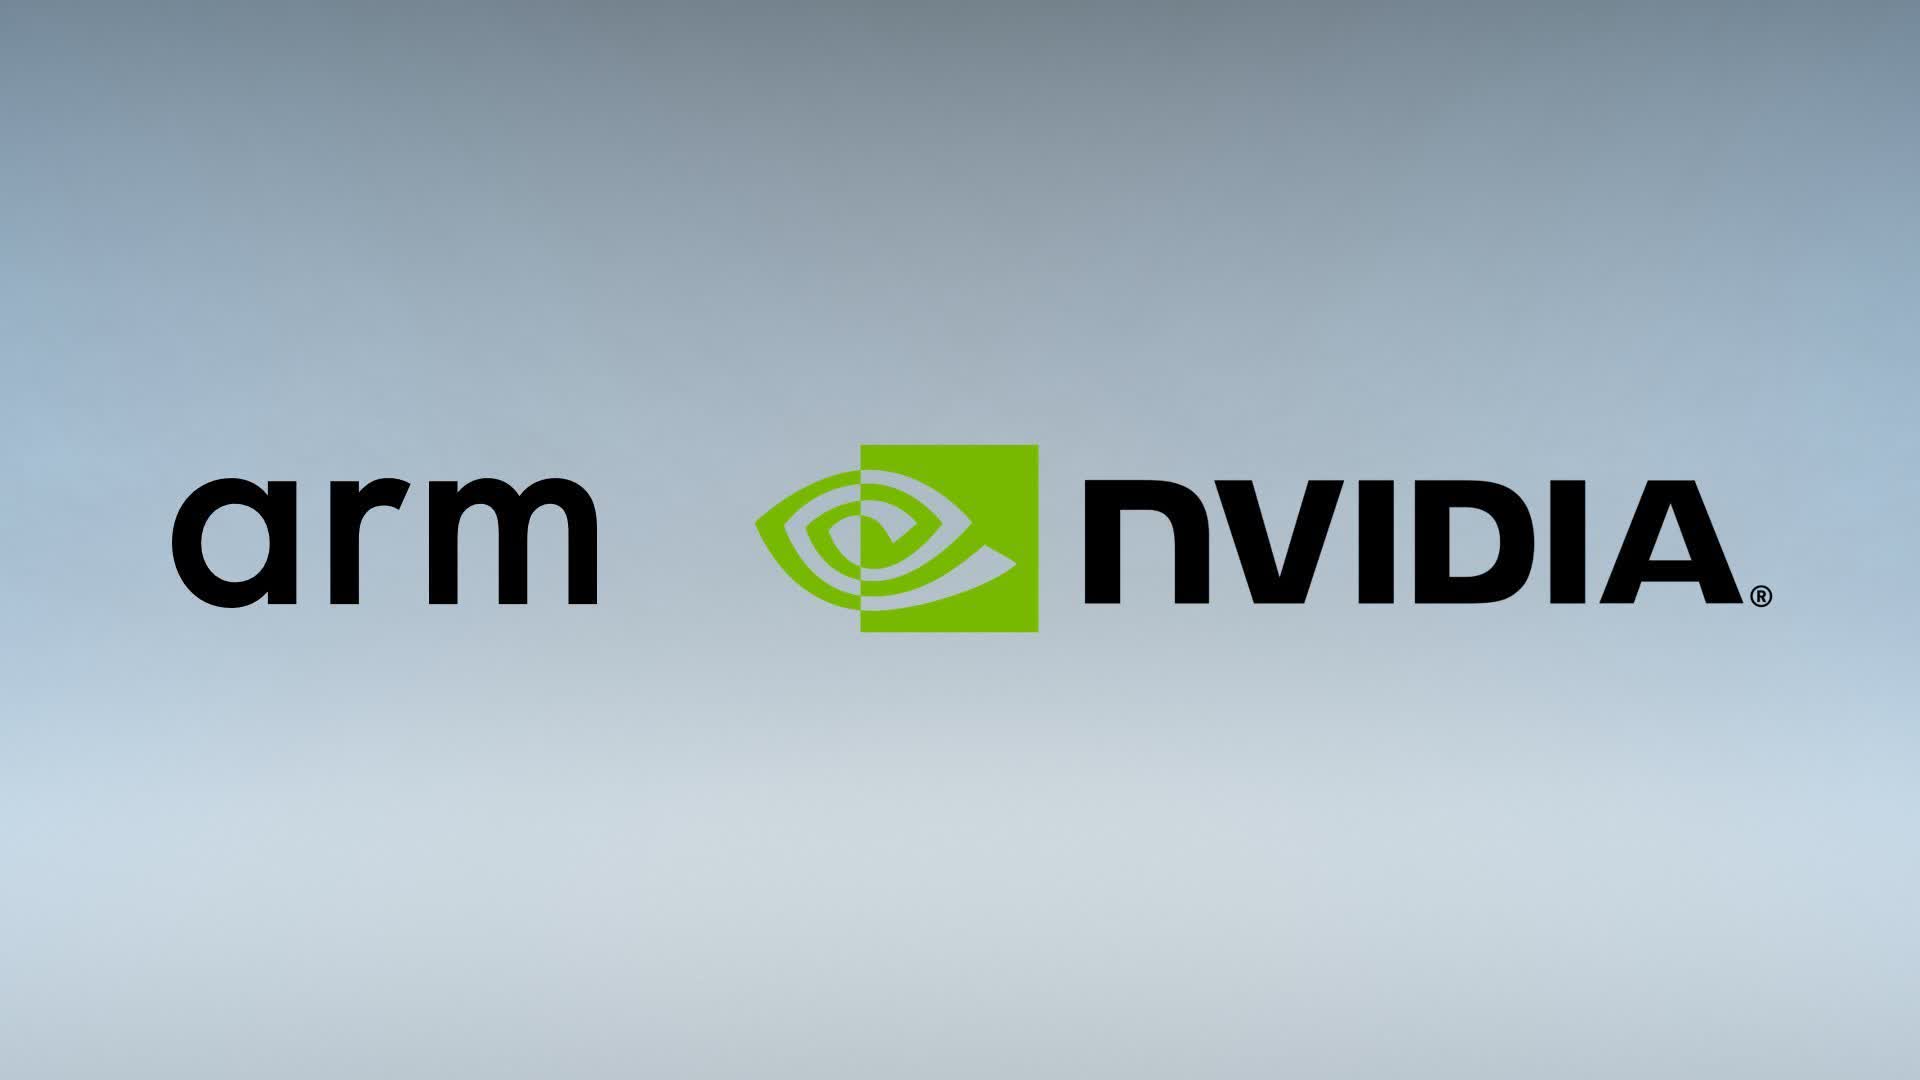 It's official: Nvidia is acquiring Arm